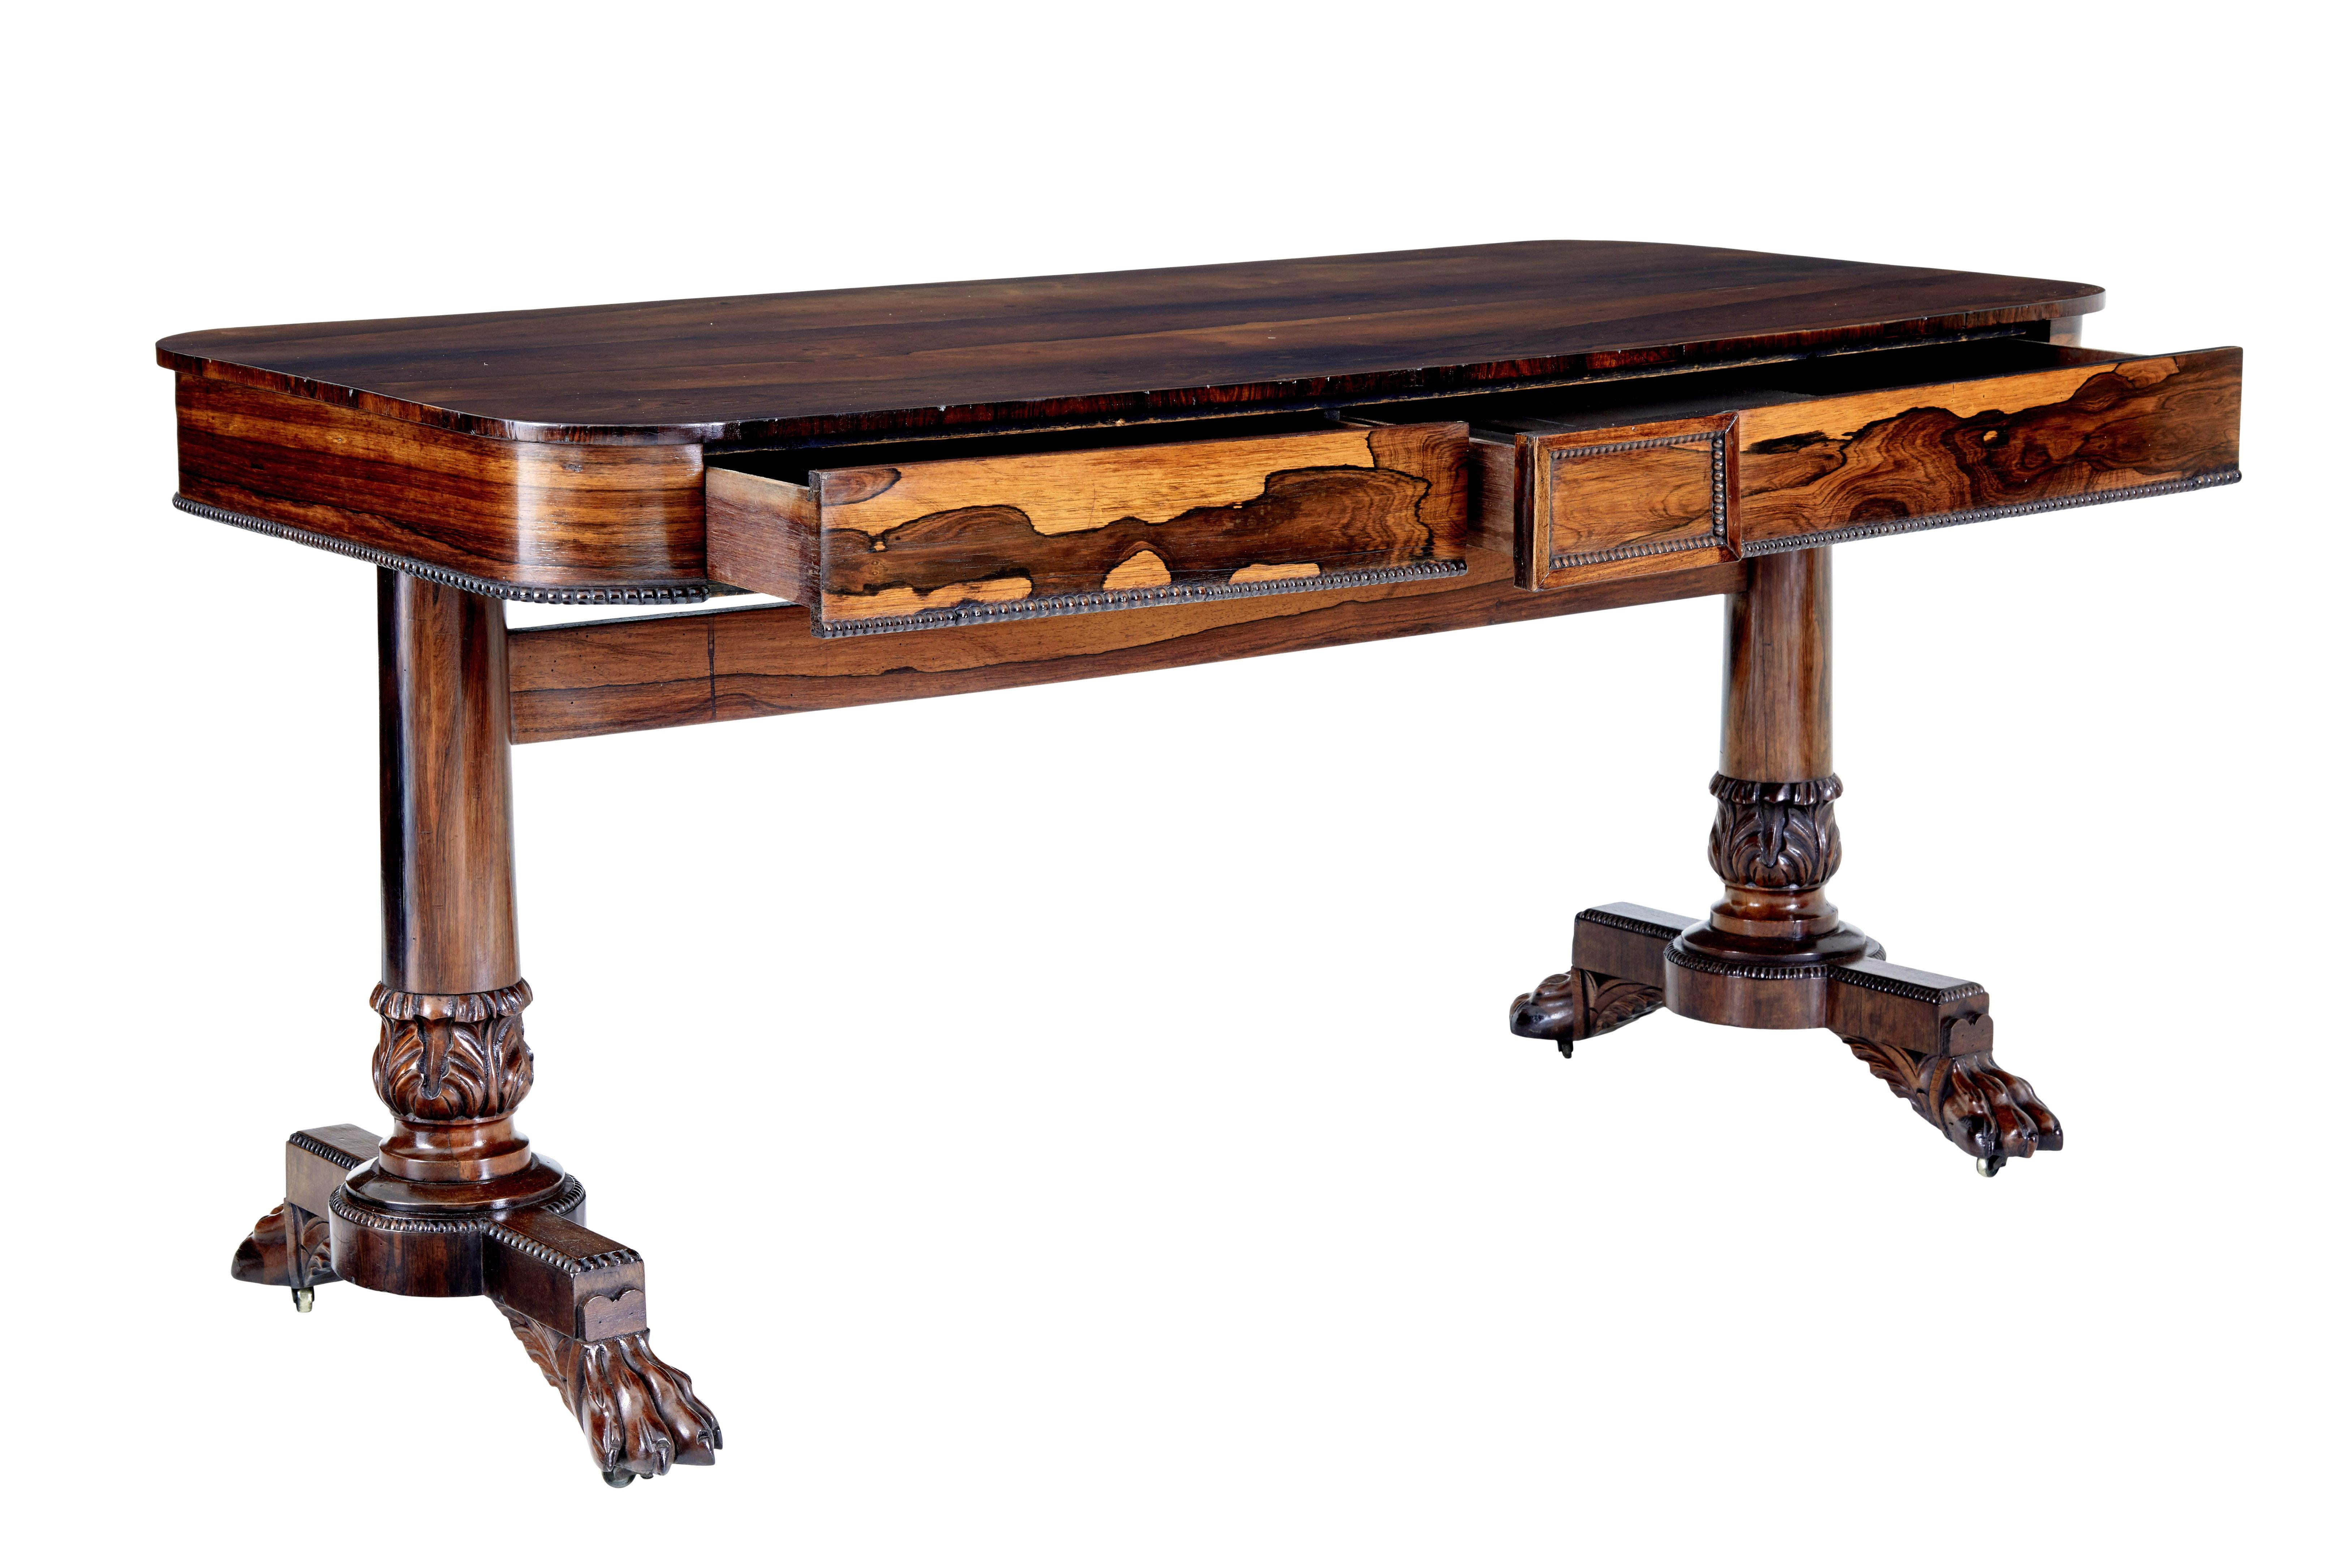 Early 19th century regency palisander library table circa 1820.

Elegant regency period library table veneered in striking palisander from the rosewood family.

Rectangular top with rounded edges, 2 drawers above the knee with beaded detailing. 